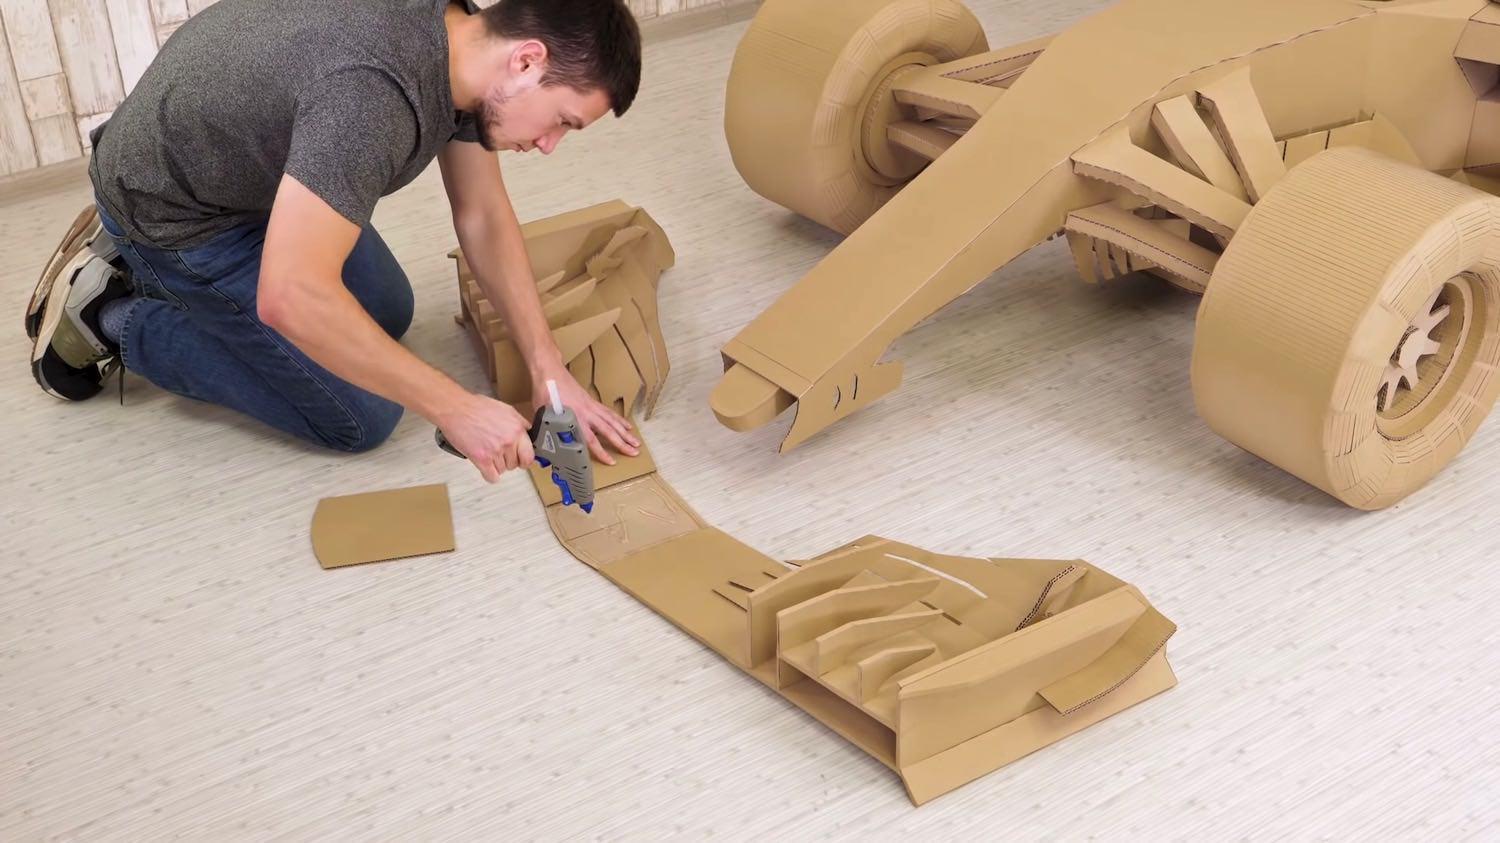 How to Make FORMULA 1 Car from Cardboard for 500 hours 4 27 screenshot 1500x843